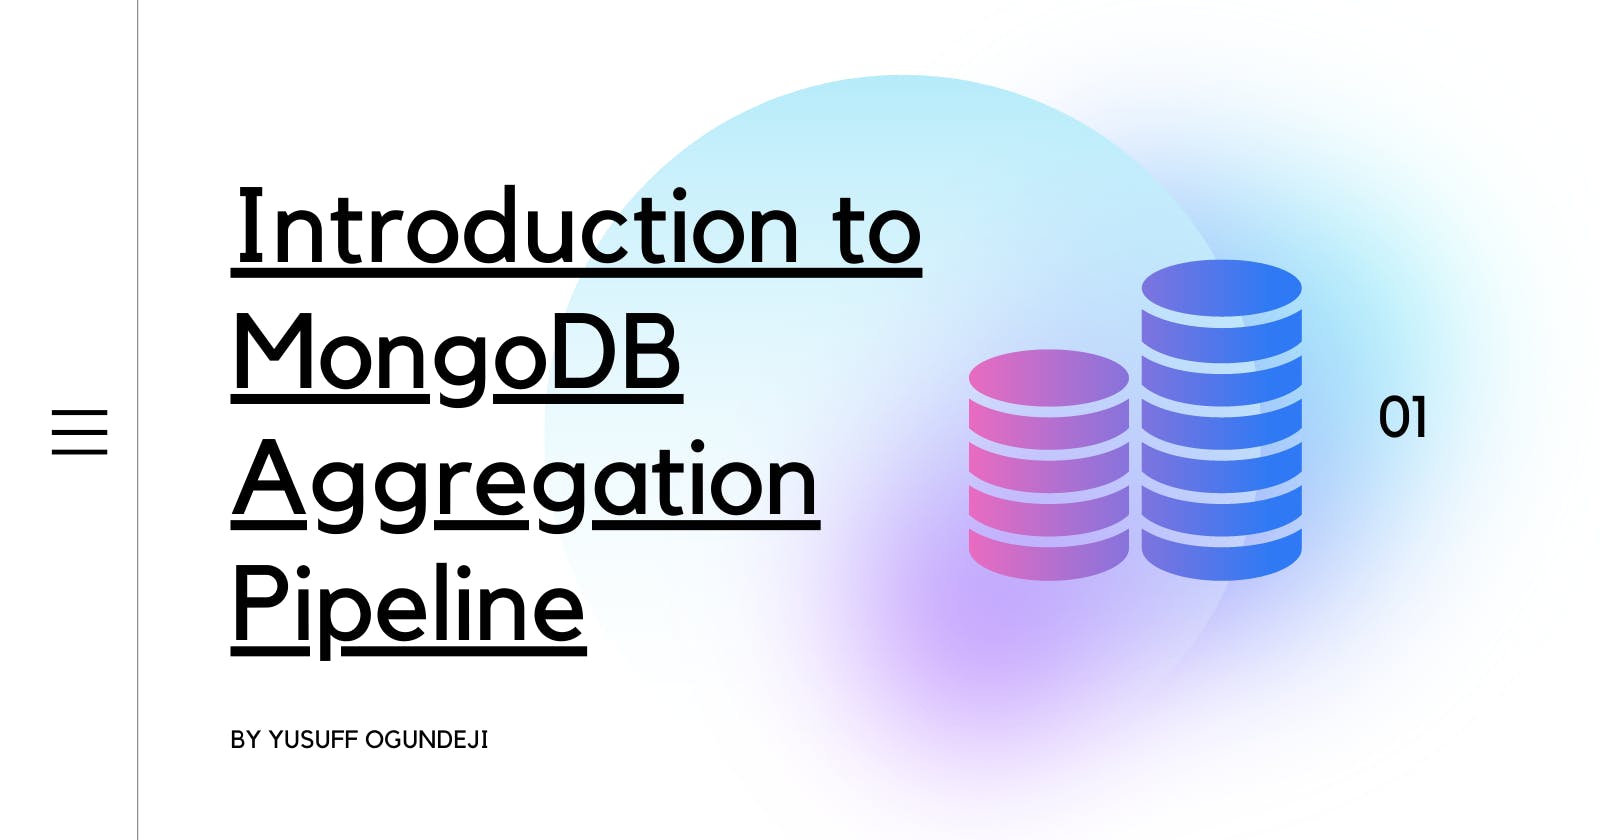 Part 1: Introduction to MongoDB Aggregation Pipeline